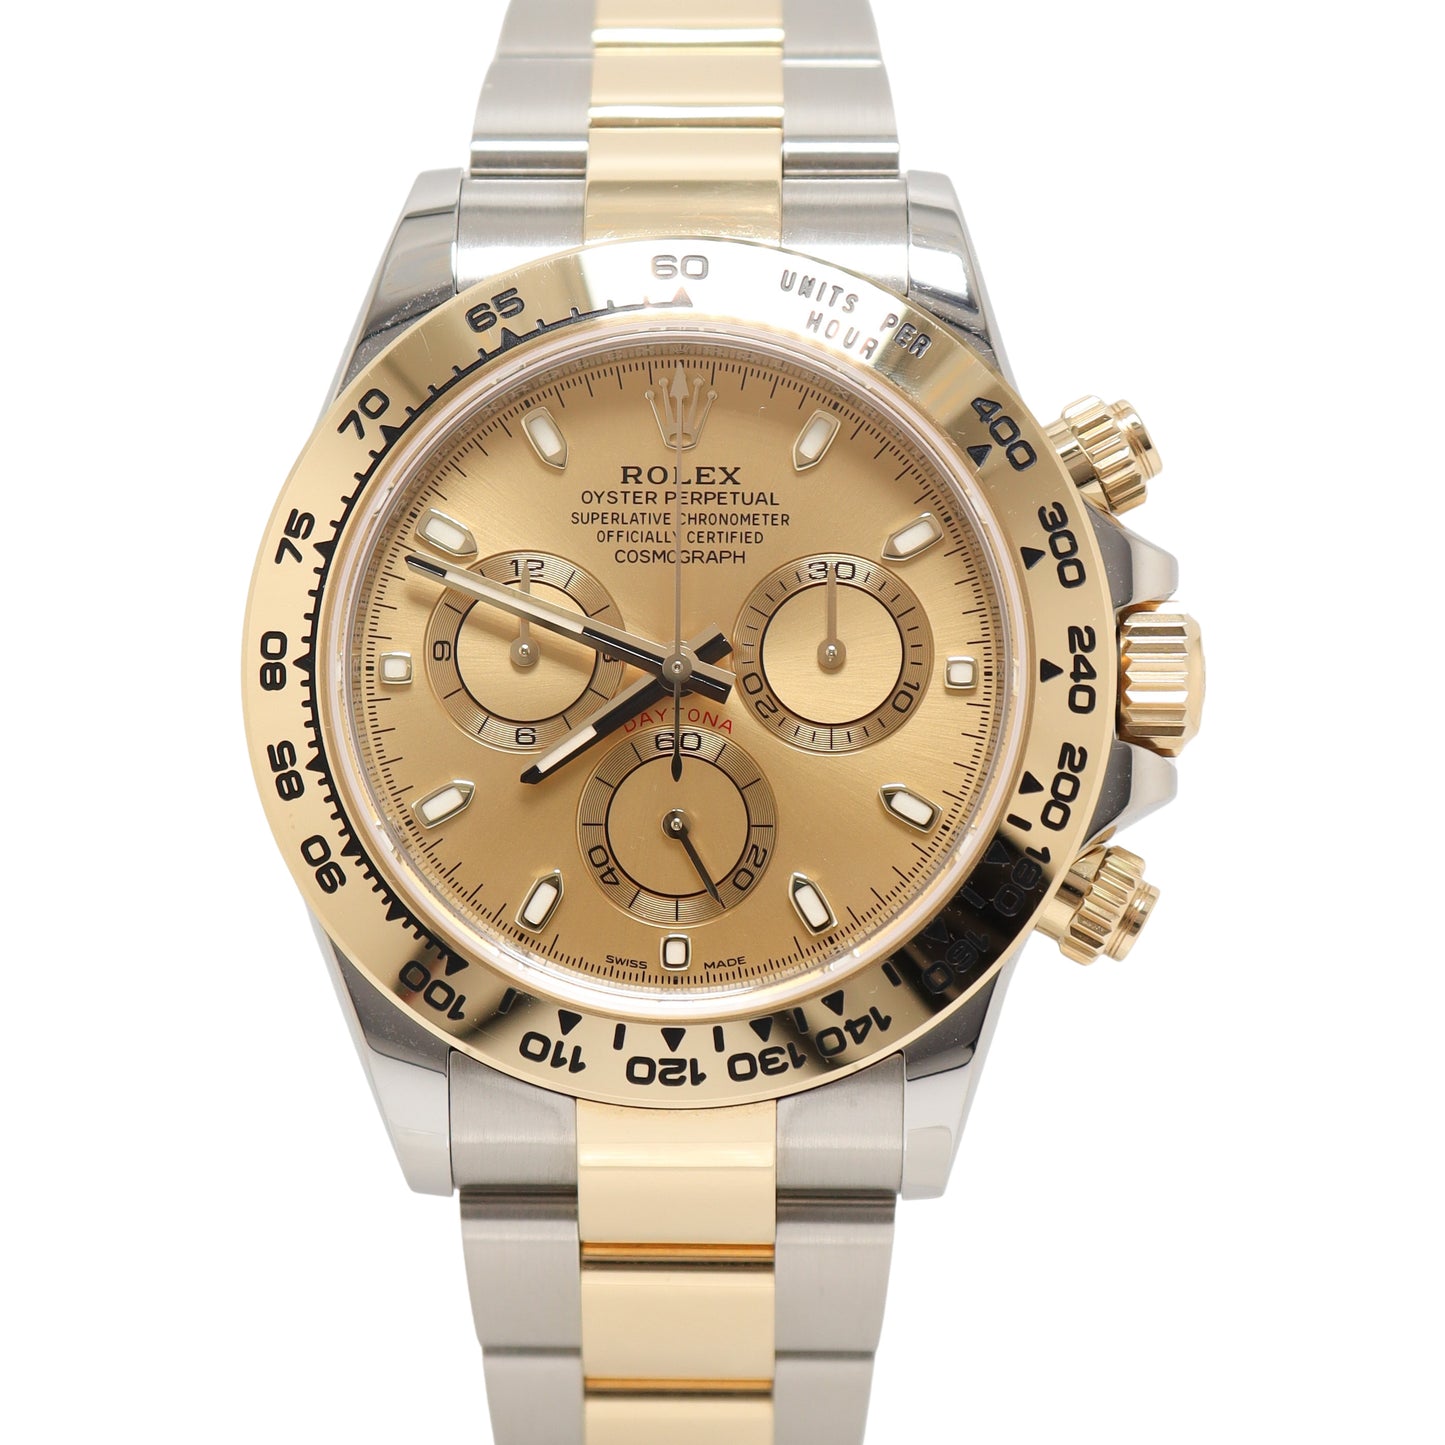 Rolex Daytona Two Tone Yellow Gold & Steel 40mm Champagne Chronograph Dial Watch Reference #: 116503